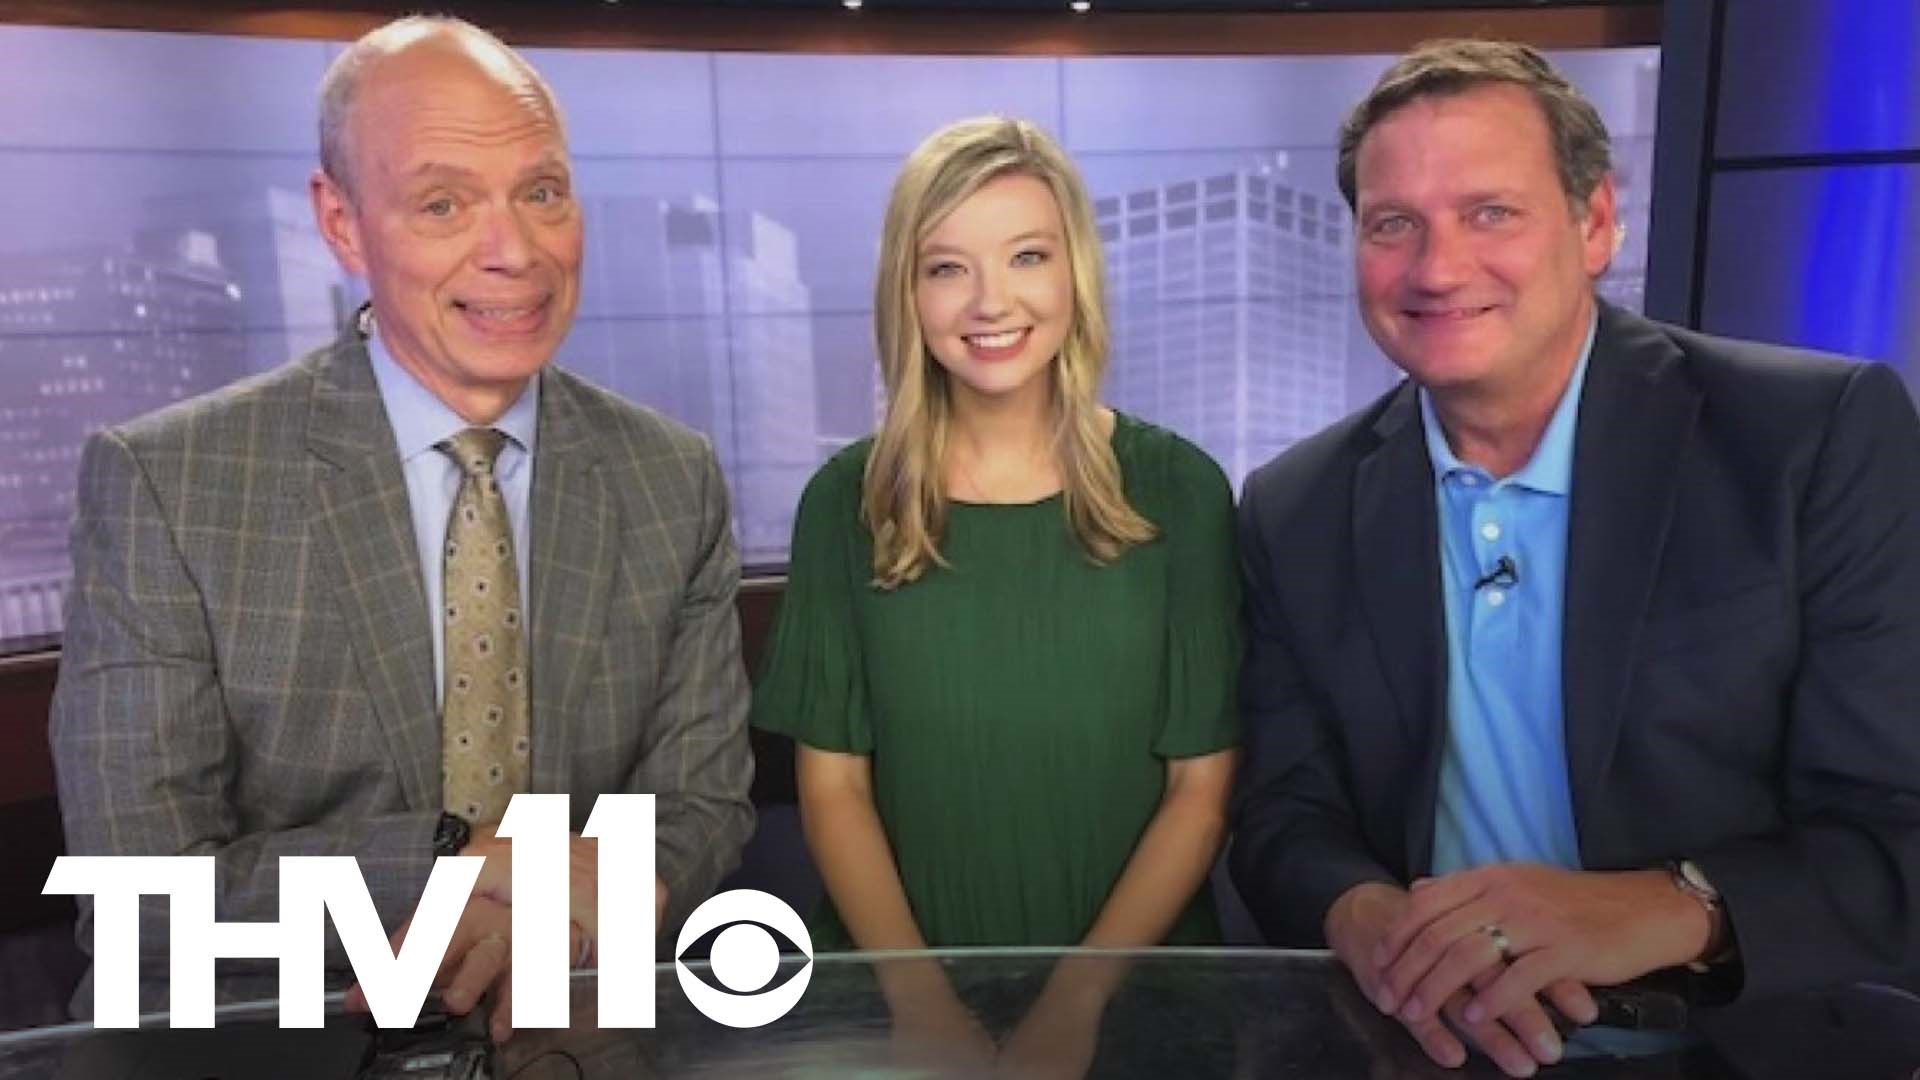 Get to know, the newest addition to THV11, Brooke Buckner. She's the daughter of beloved former meteorologist Ed Buckner and joins as a reporter.